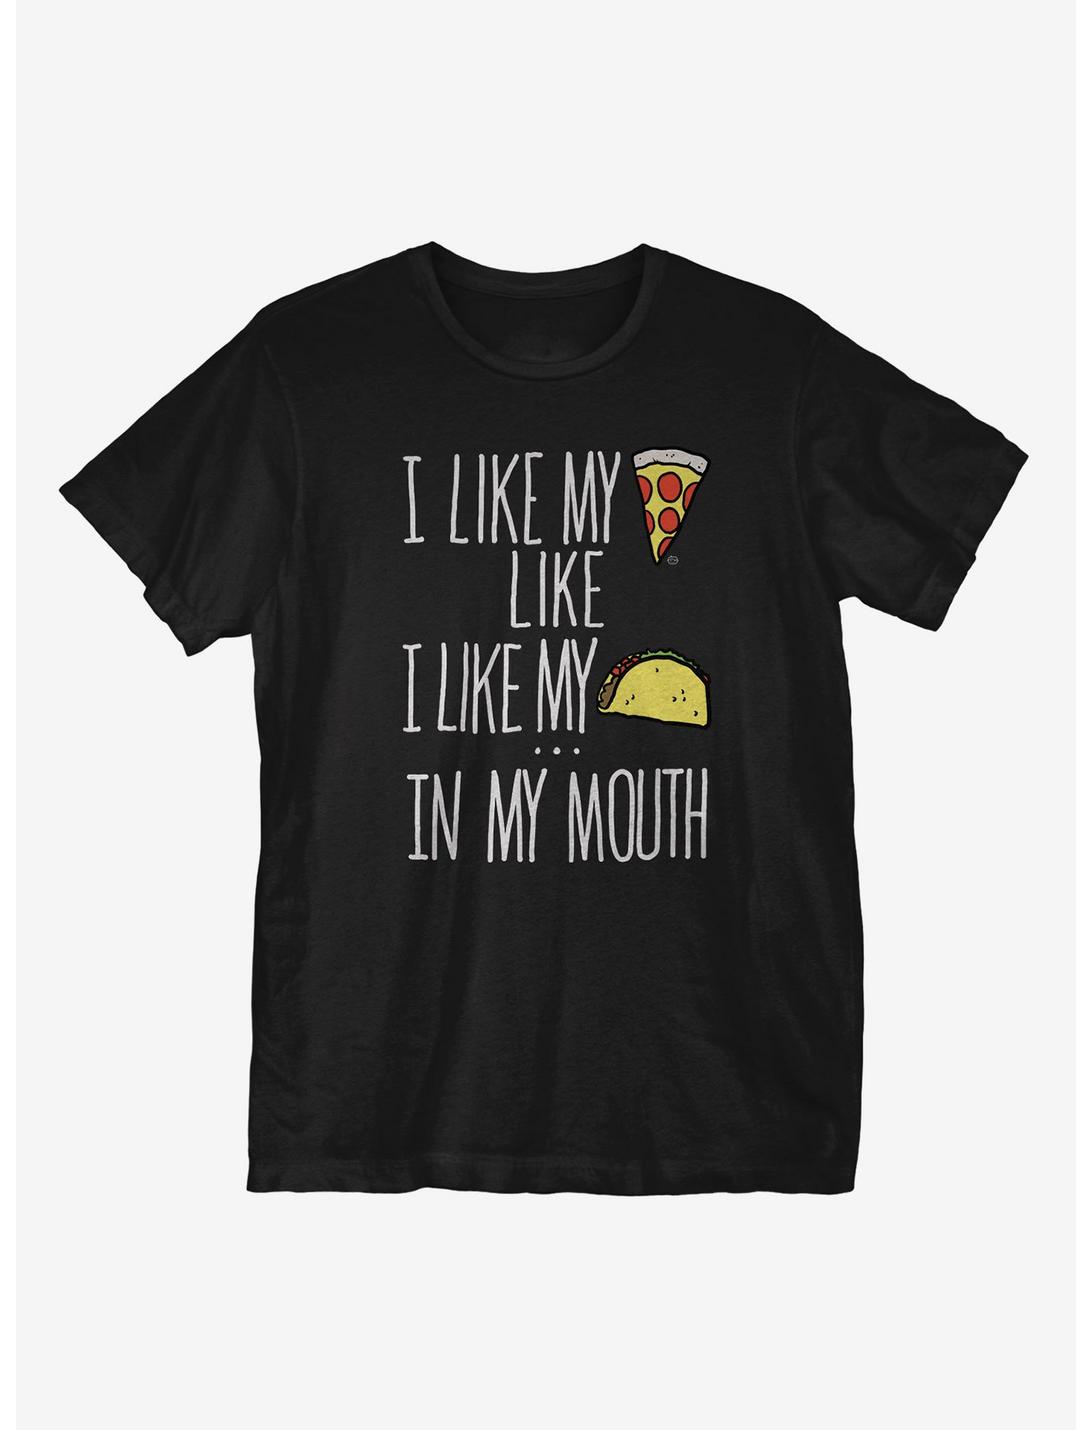 In My Mouth T-Shirt, BLACK, hi-res